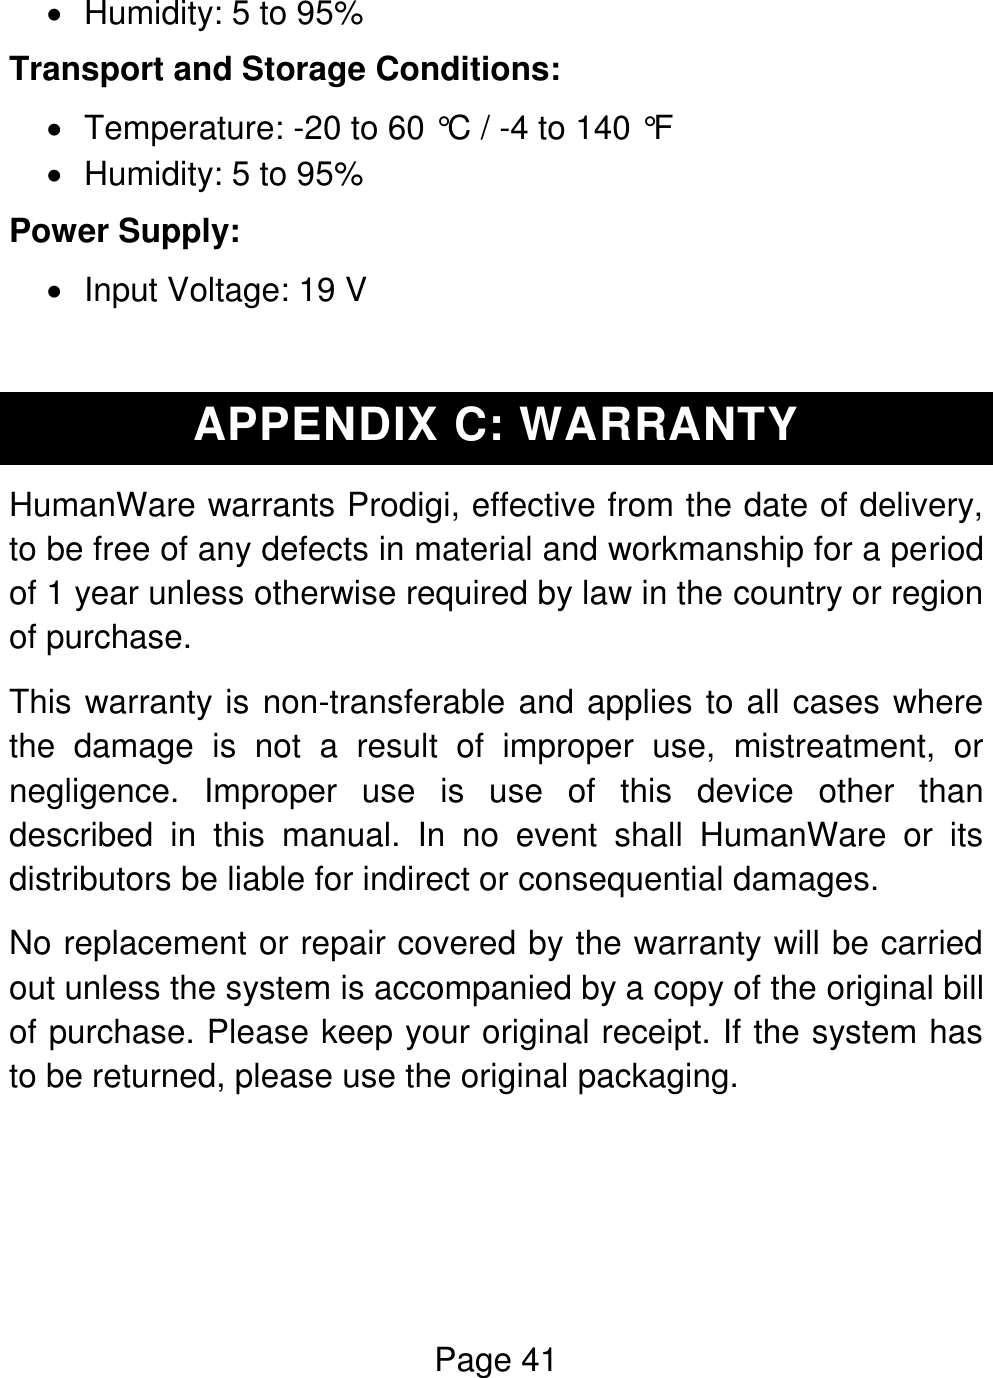 Page 41    Humidity: 5 to 95% Transport and Storage Conditions:   Temperature: -20 to 60 °C / -4 to 140 °F   Humidity: 5 to 95% Power Supply:   Input Voltage: 19 V  APPENDIX C: WARRANTY HumanWare warrants Prodigi, effective from the date of delivery, to be free of any defects in material and workmanship for a period of 1 year unless otherwise required by law in the country or region of purchase. This warranty is non-transferable and applies to all cases where the  damage  is  not  a  result  of  improper  use,  mistreatment,  or negligence.  Improper  use  is  use  of  this  device  other  than described  in  this  manual.  In  no  event  shall  HumanWare  or  its distributors be liable for indirect or consequential damages. No replacement or repair covered by the warranty will be carried out unless the system is accompanied by a copy of the original bill of purchase. Please keep your original receipt. If the system has to be returned, please use the original packaging.    